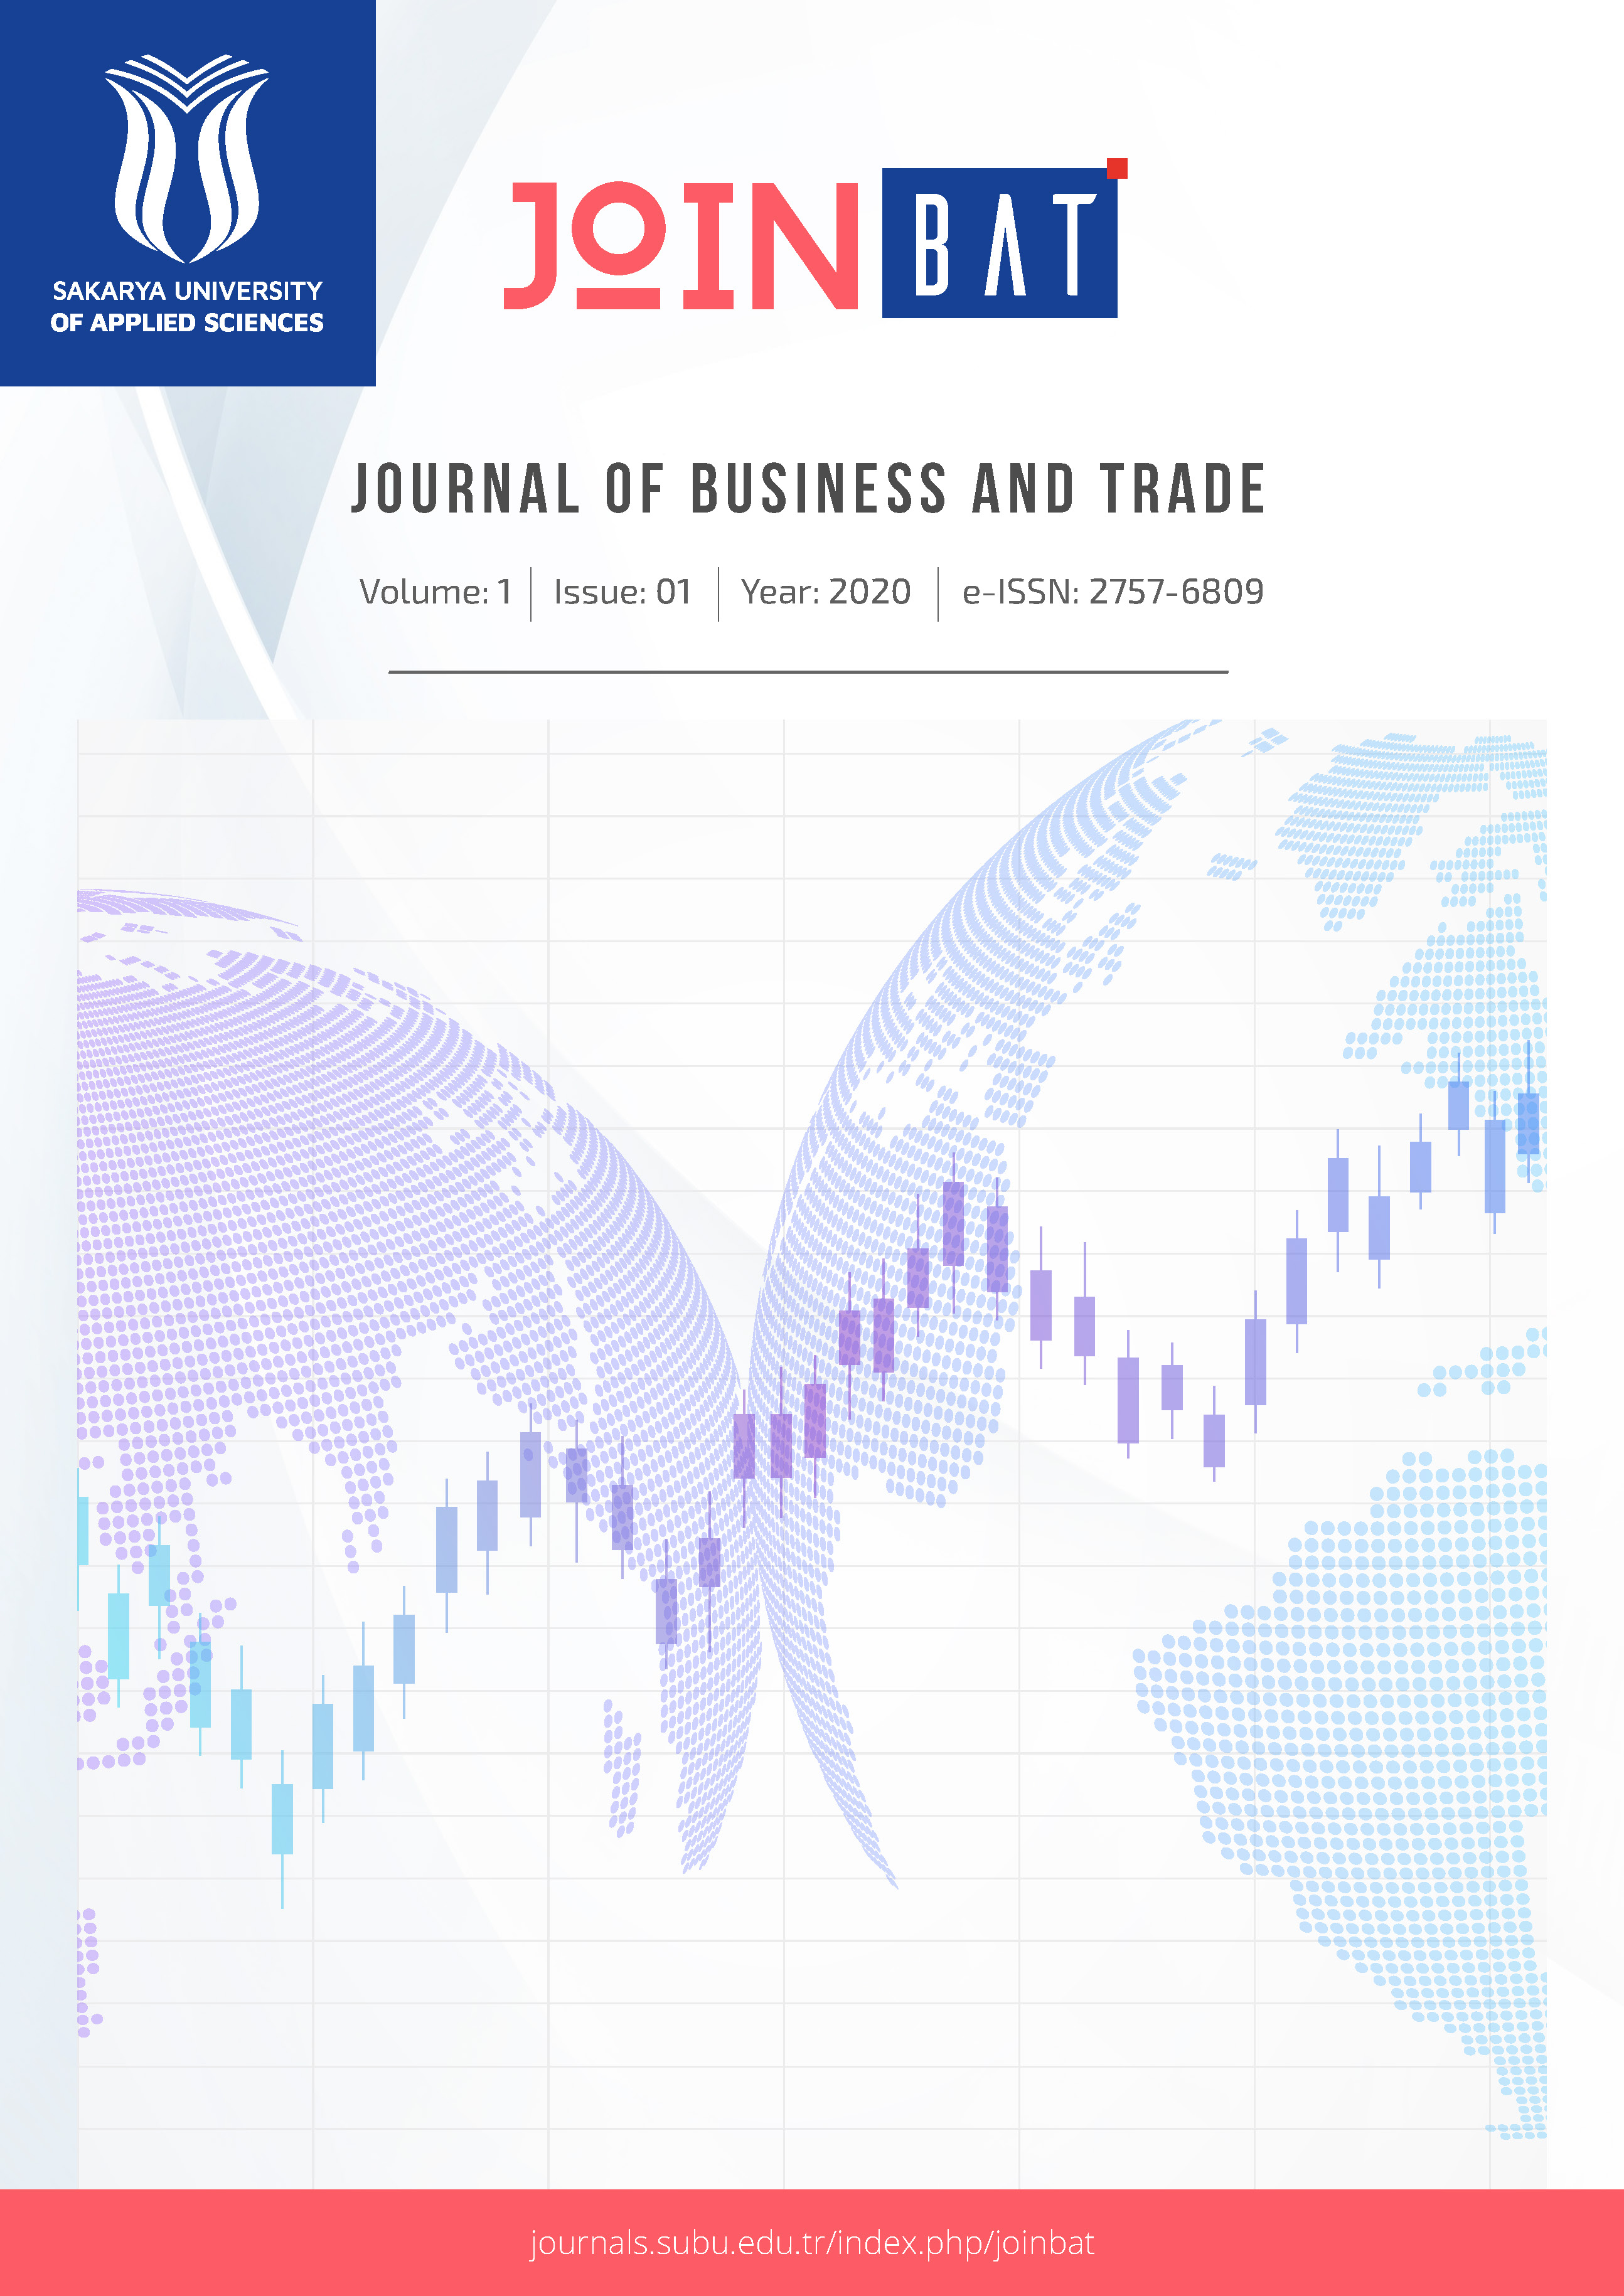 JOURNAL OF BUSINESS AND TRADE